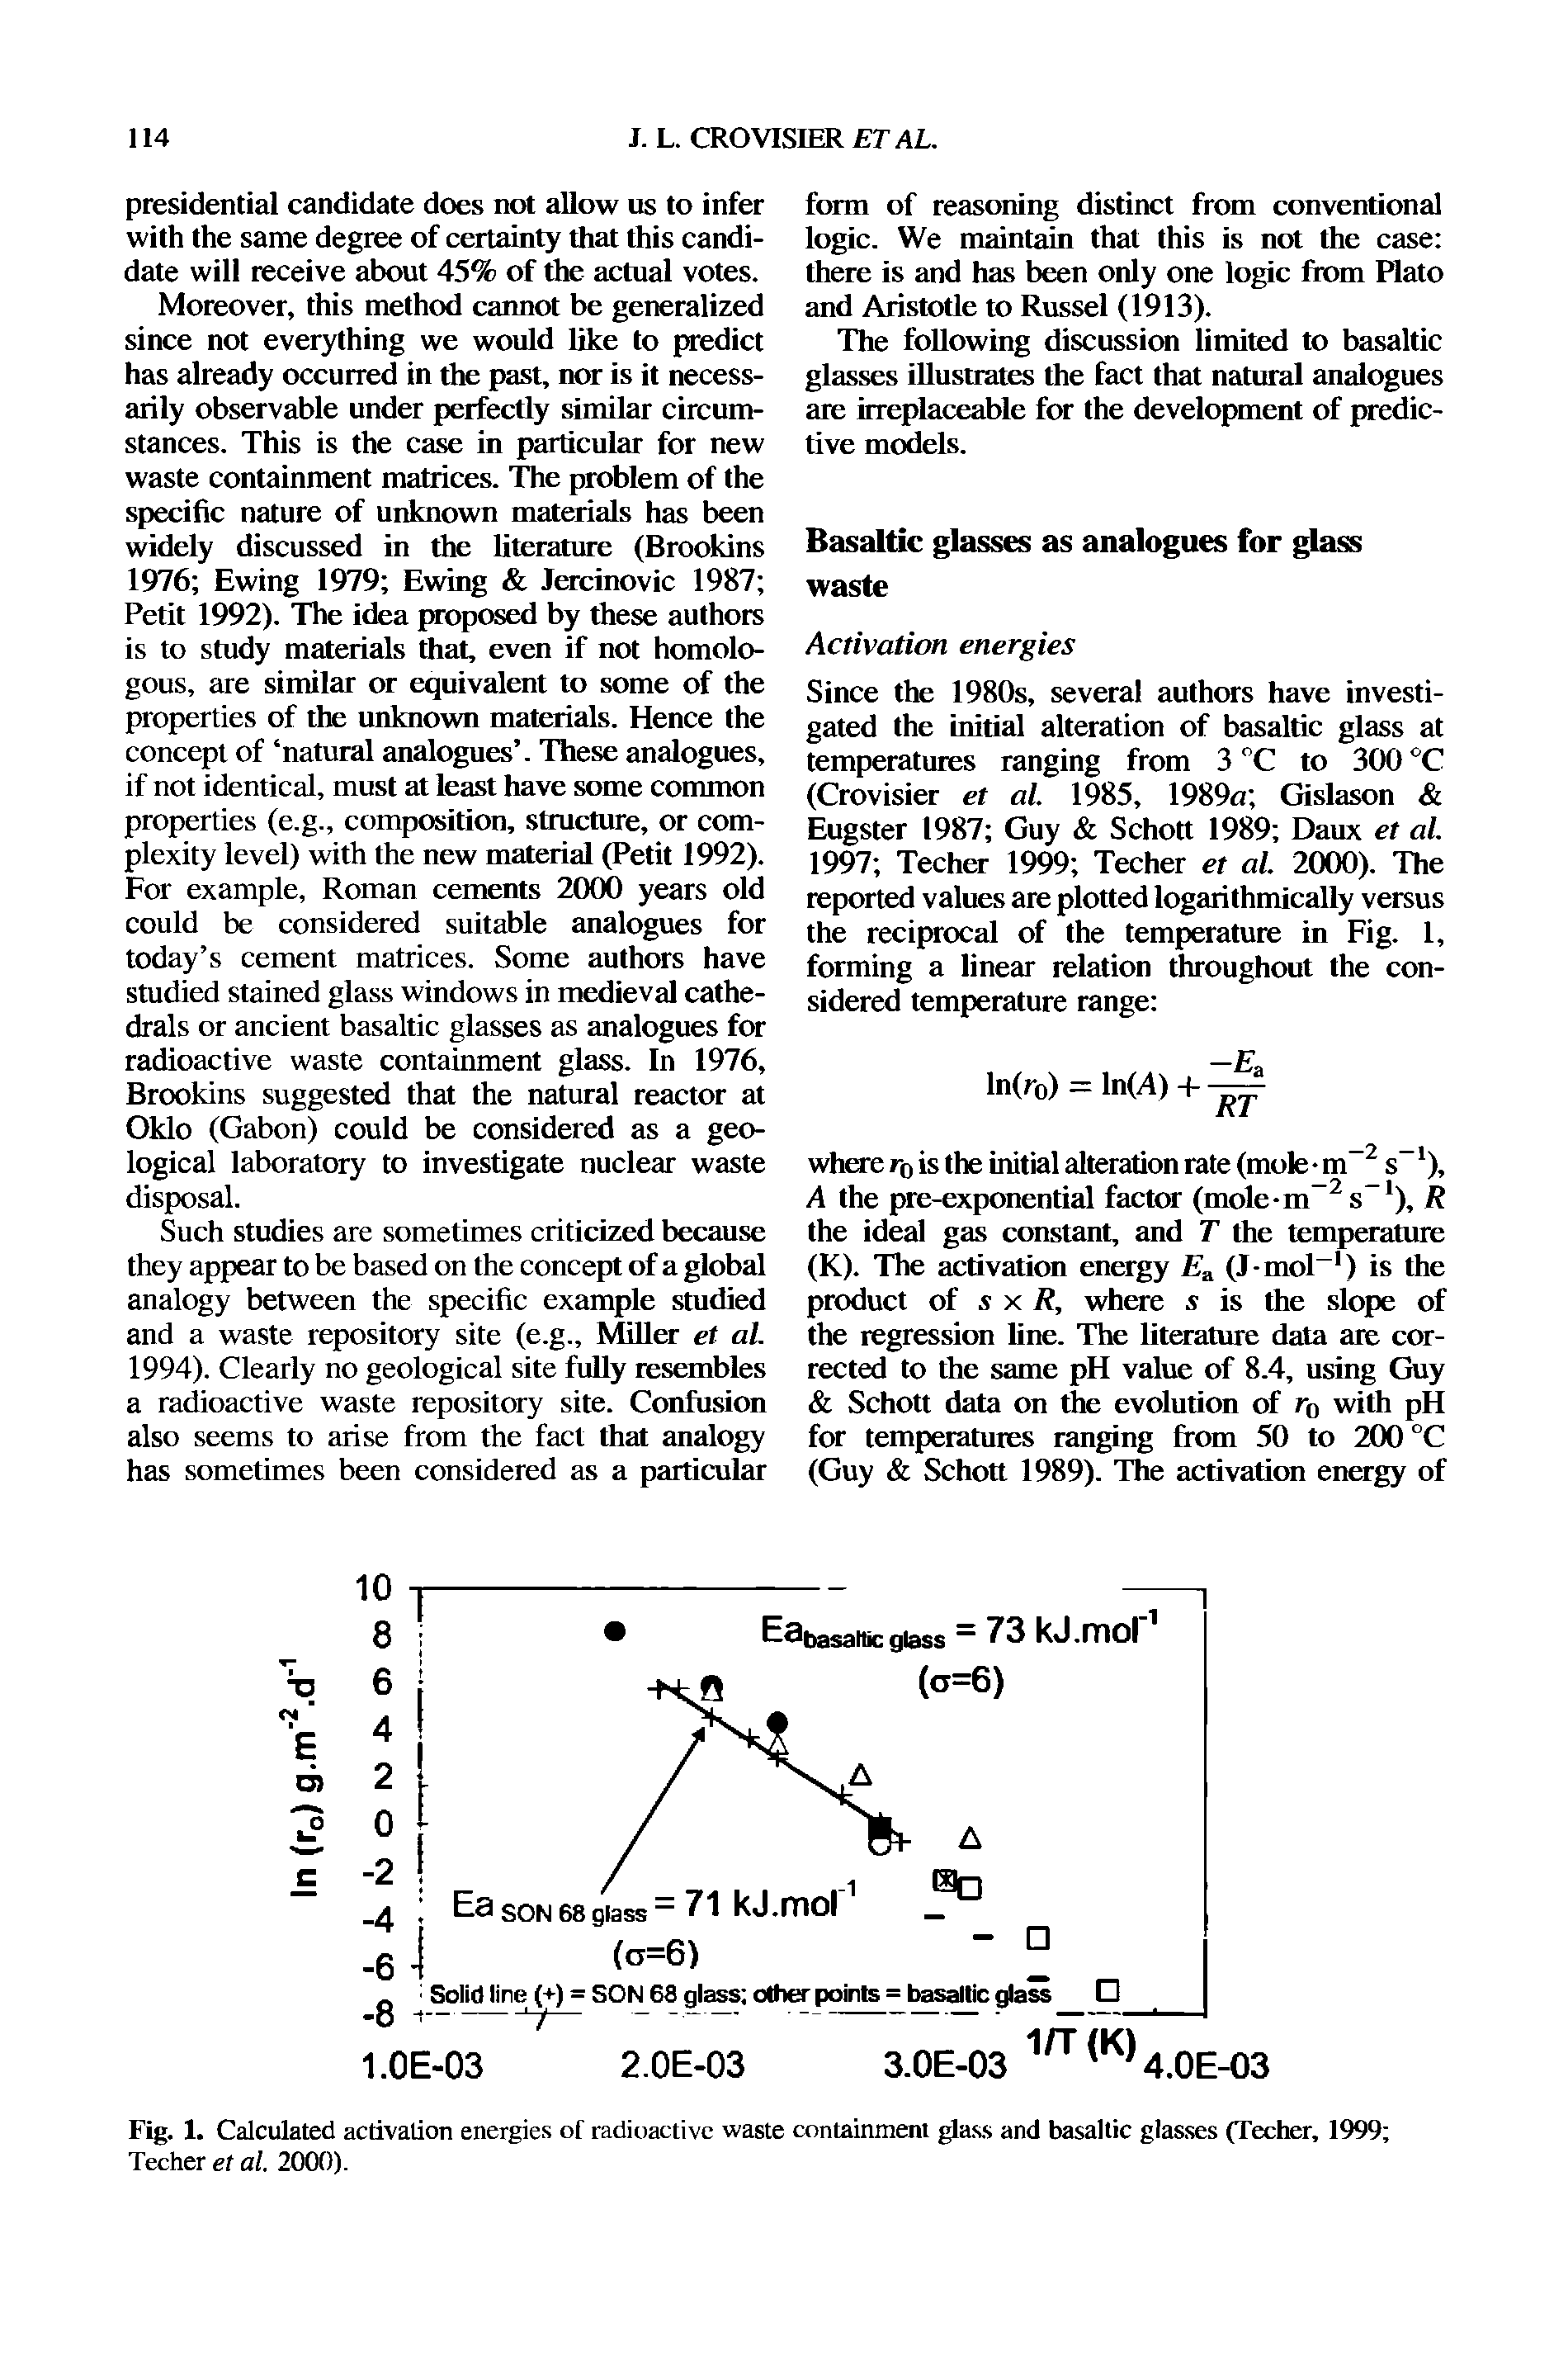 Fig. 1. Calculated activation energies of radioactive waste containment glass and basaltic glasses (Techer, 1999 Techer et al. 2000).